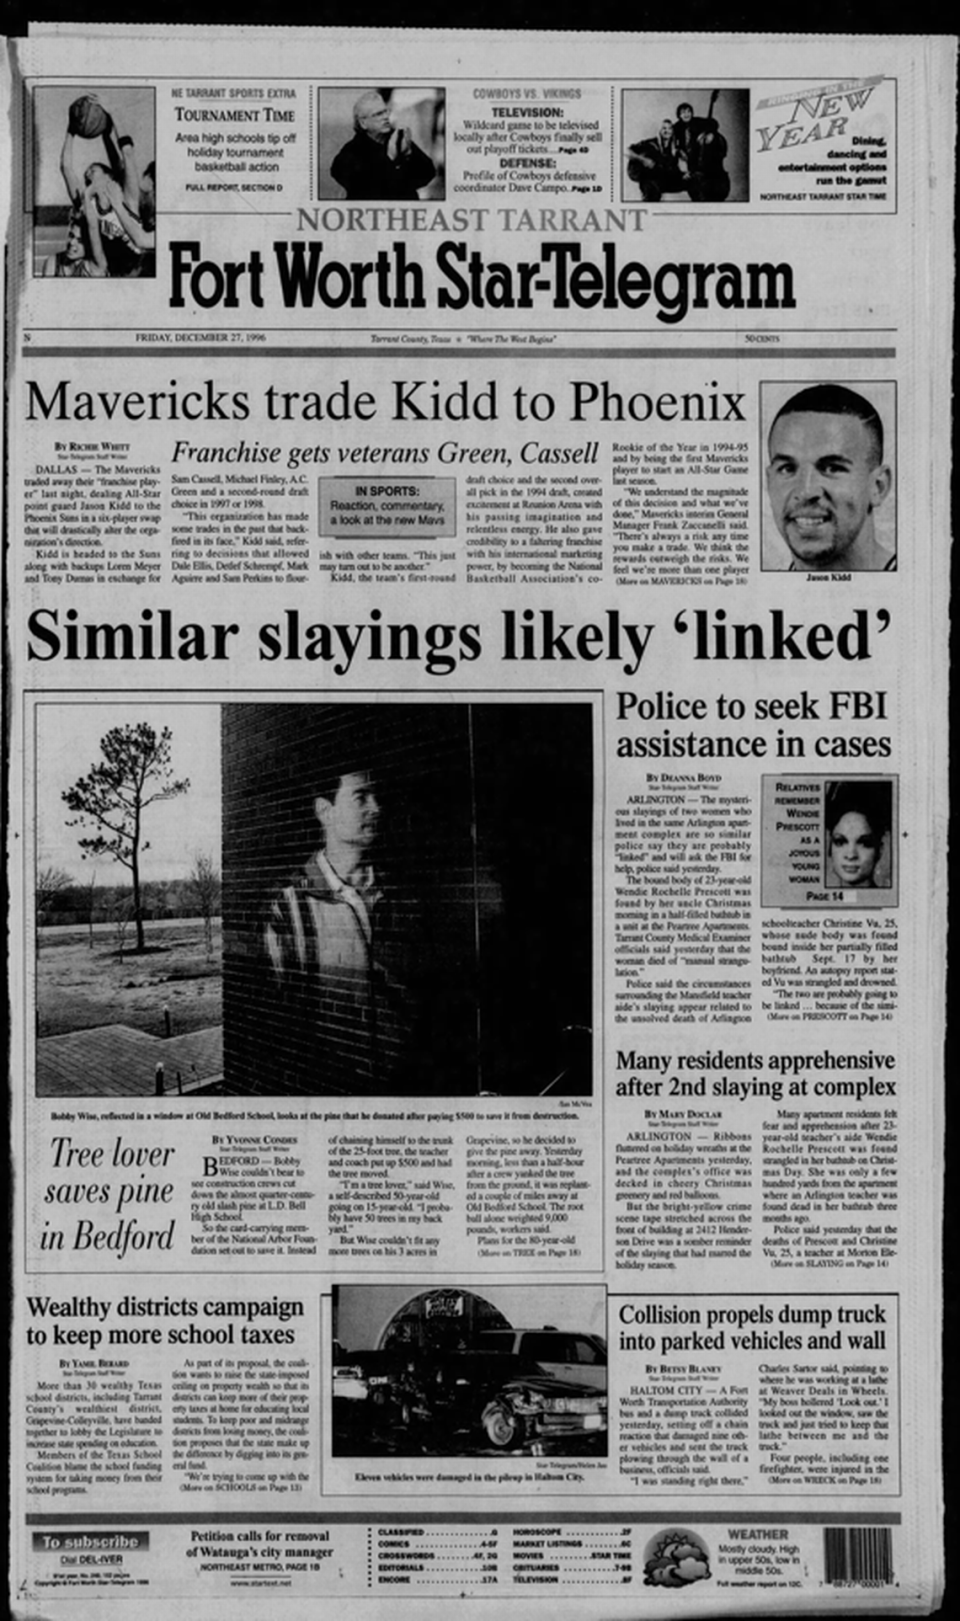 The front page of the Fort Worth Star-Telegram on Dec. 27, 1996.